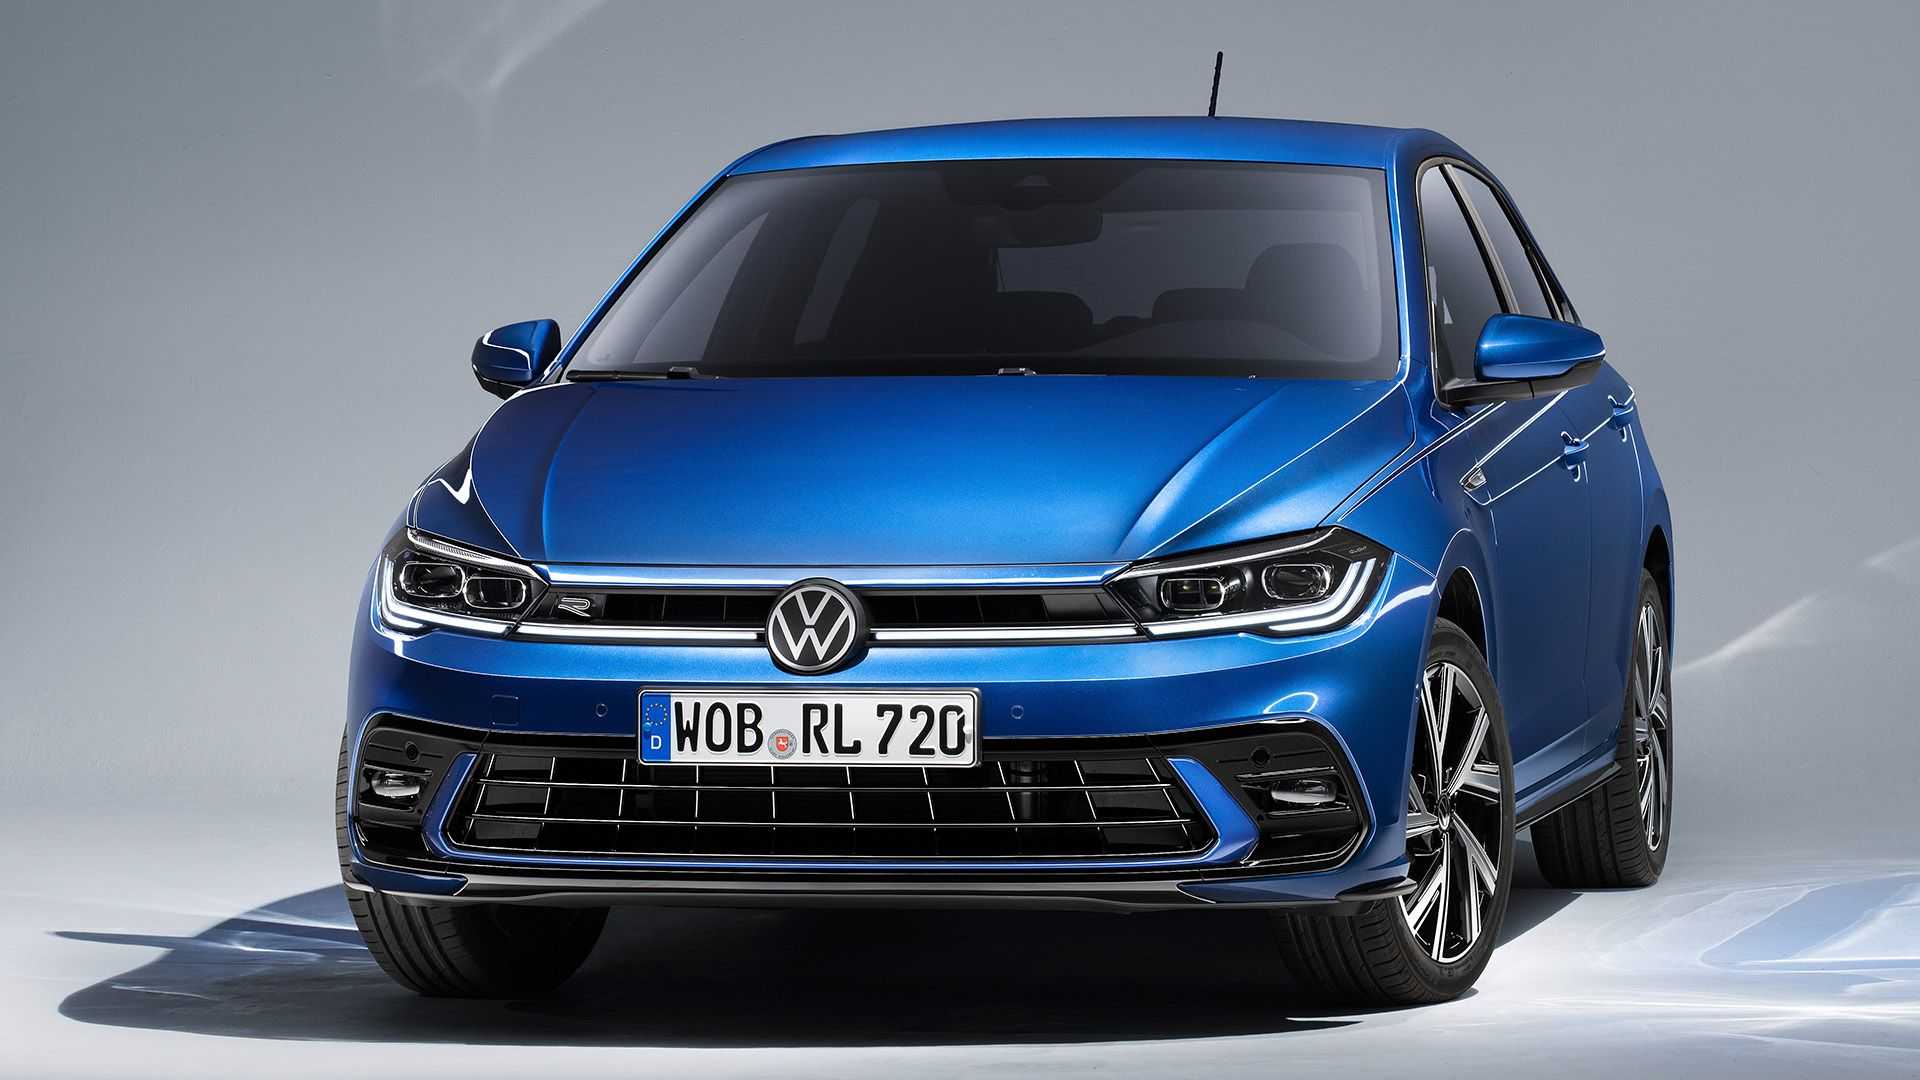 Volkswagen Polo Facelift Revealed With Mini Golf Looks